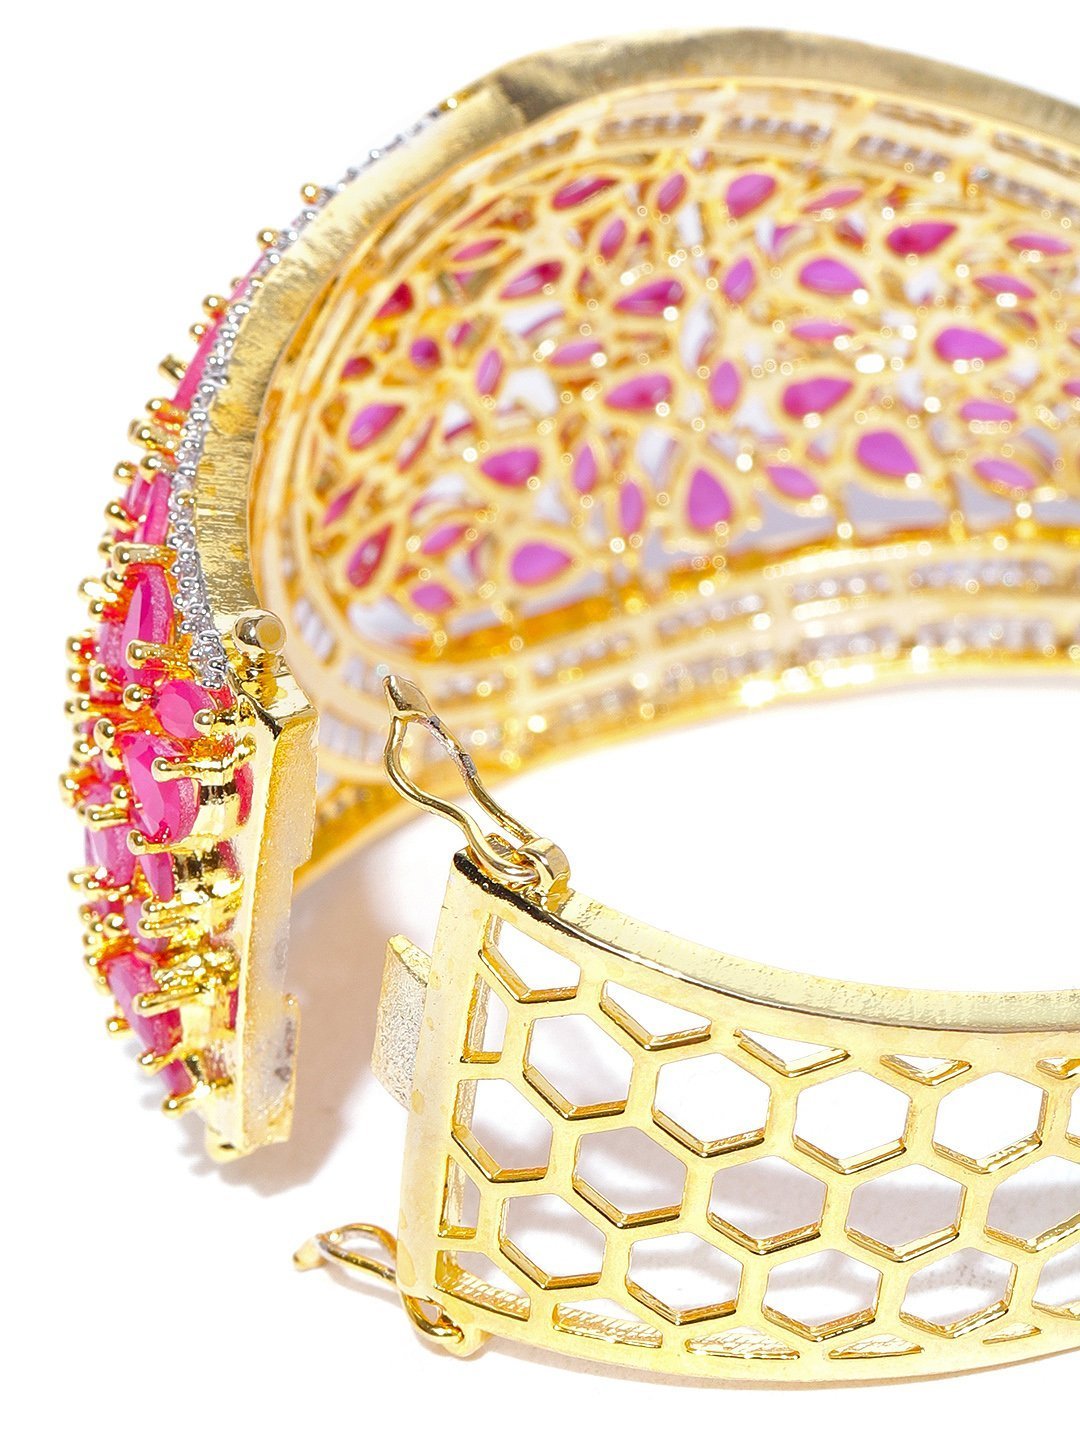 Women's Gold-Plated American Diamond and Ruby Studded Kada Bracelet in Pink Color - Priyaasi